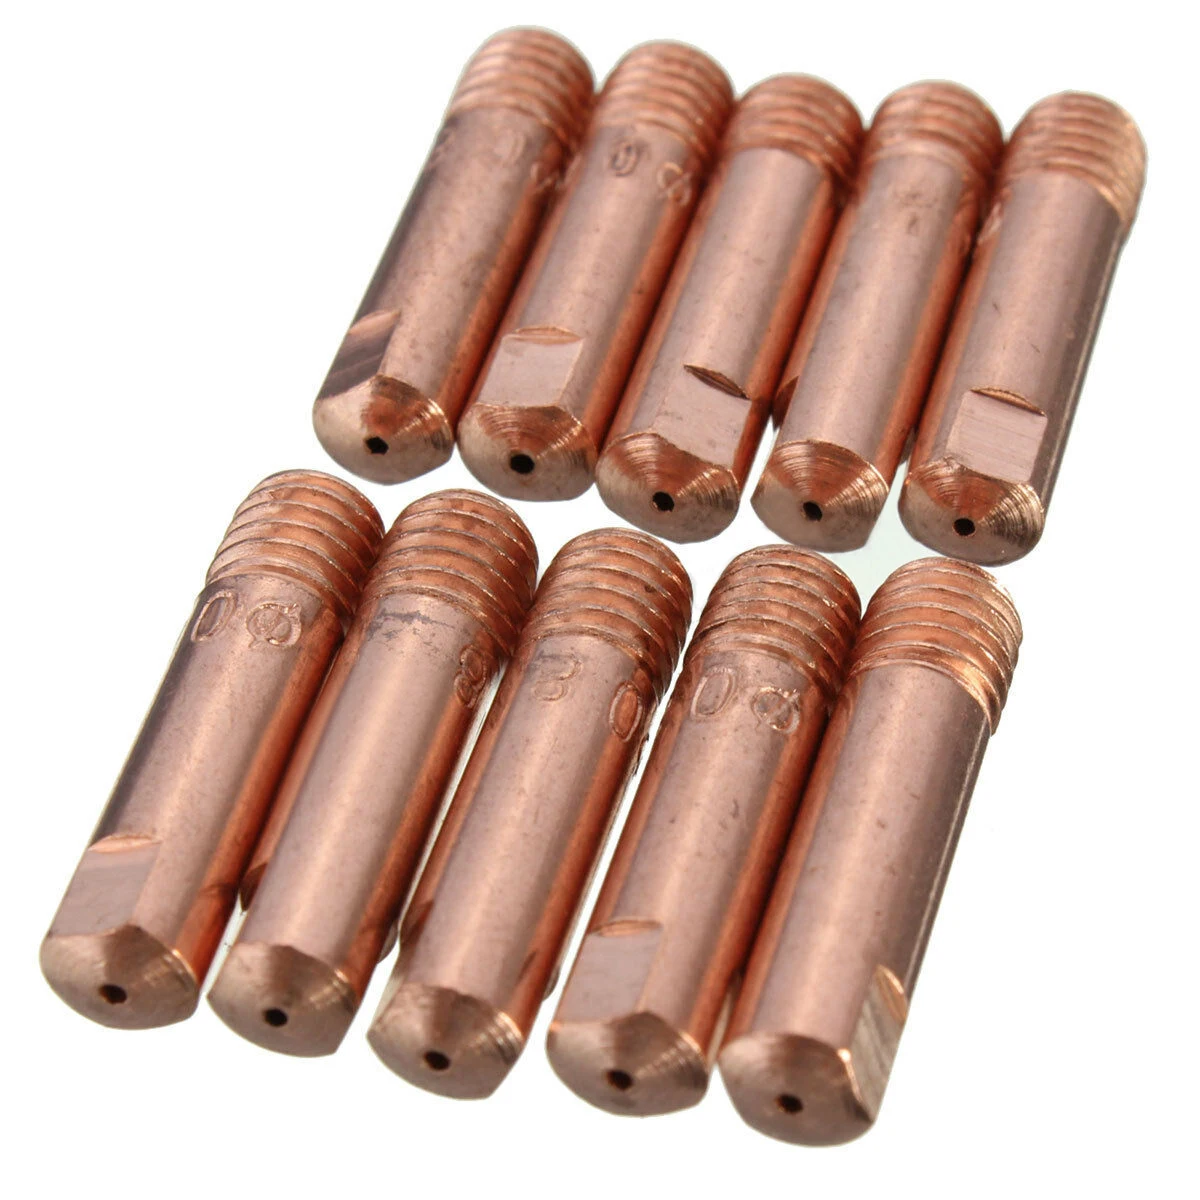 

Tips Nozzles Holder Set Copper 25*6mm MB-15AK MIG/MAG M6 Welding Torch 10Pcs 10x 0.8/1.0/1.2mm Useful Practical